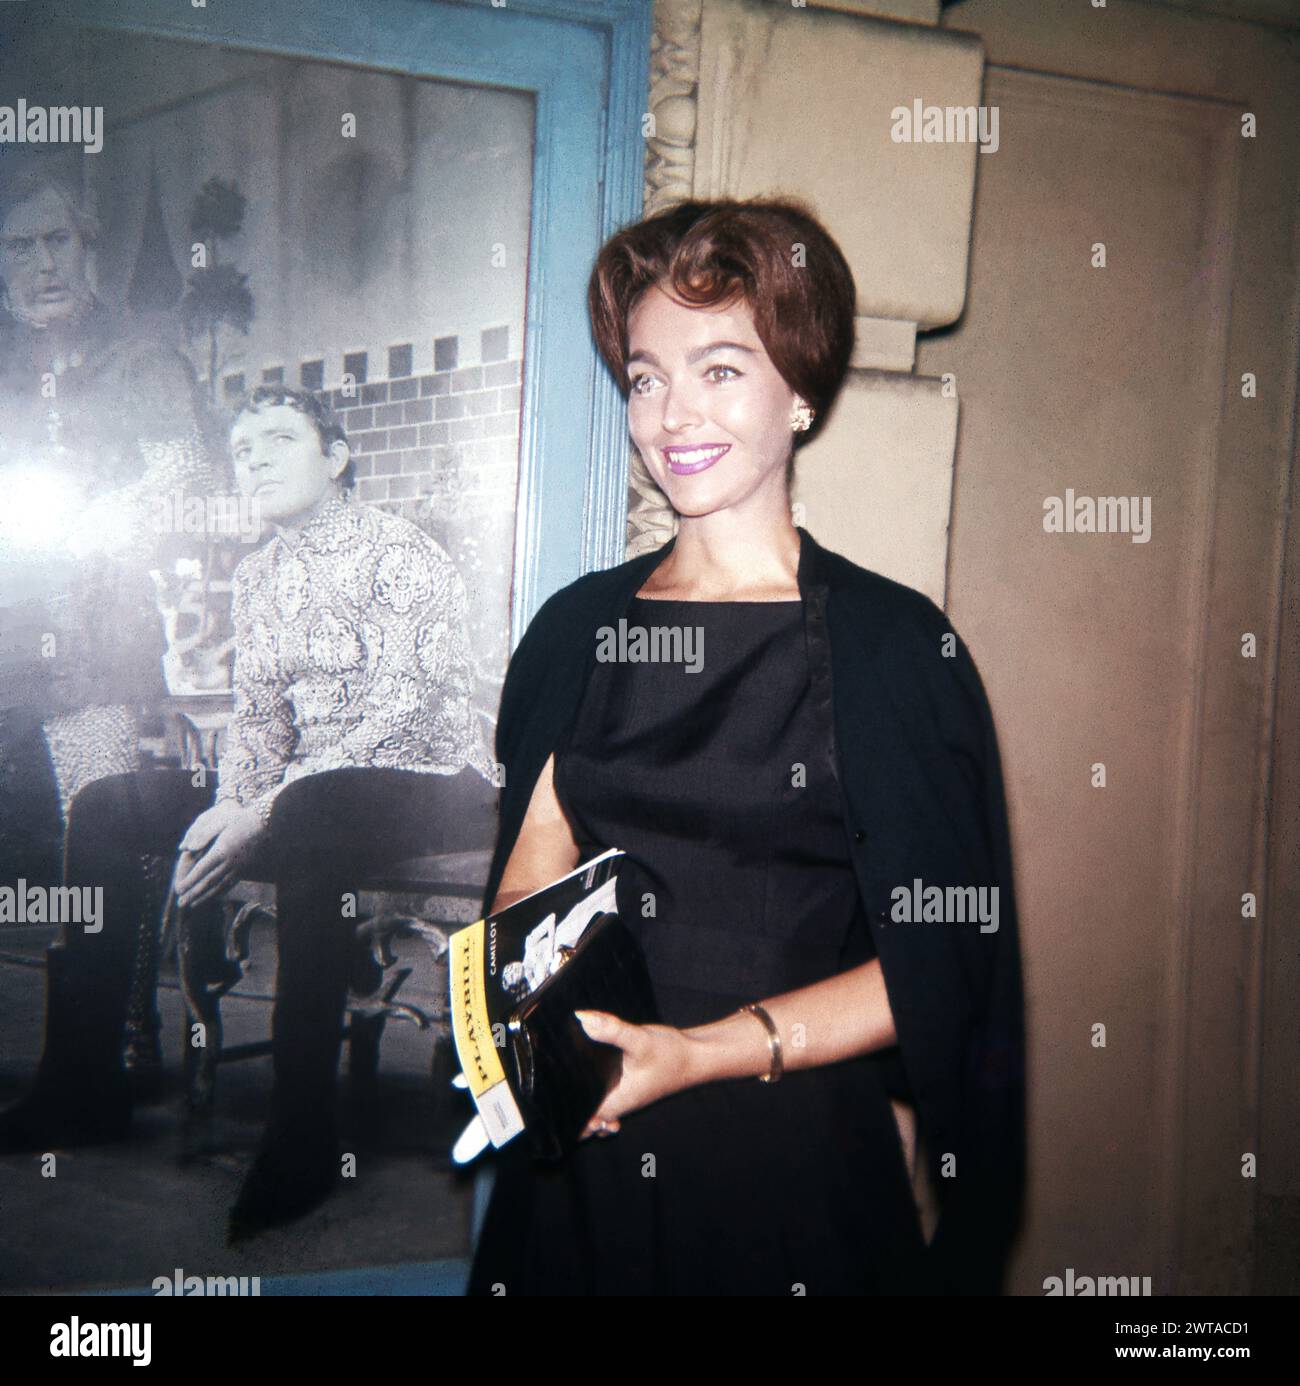 JOAN WELDON circa December 1960 at the Majestic Theatre in New York to see RICHARD BURTON JULIE ANDREWS and ROBERT COOTE in CAMELOT the Broadway musical with lyrics by Alan Jay Lerner and music by Frederick Loewe staged by Moss Hart Stock Photo